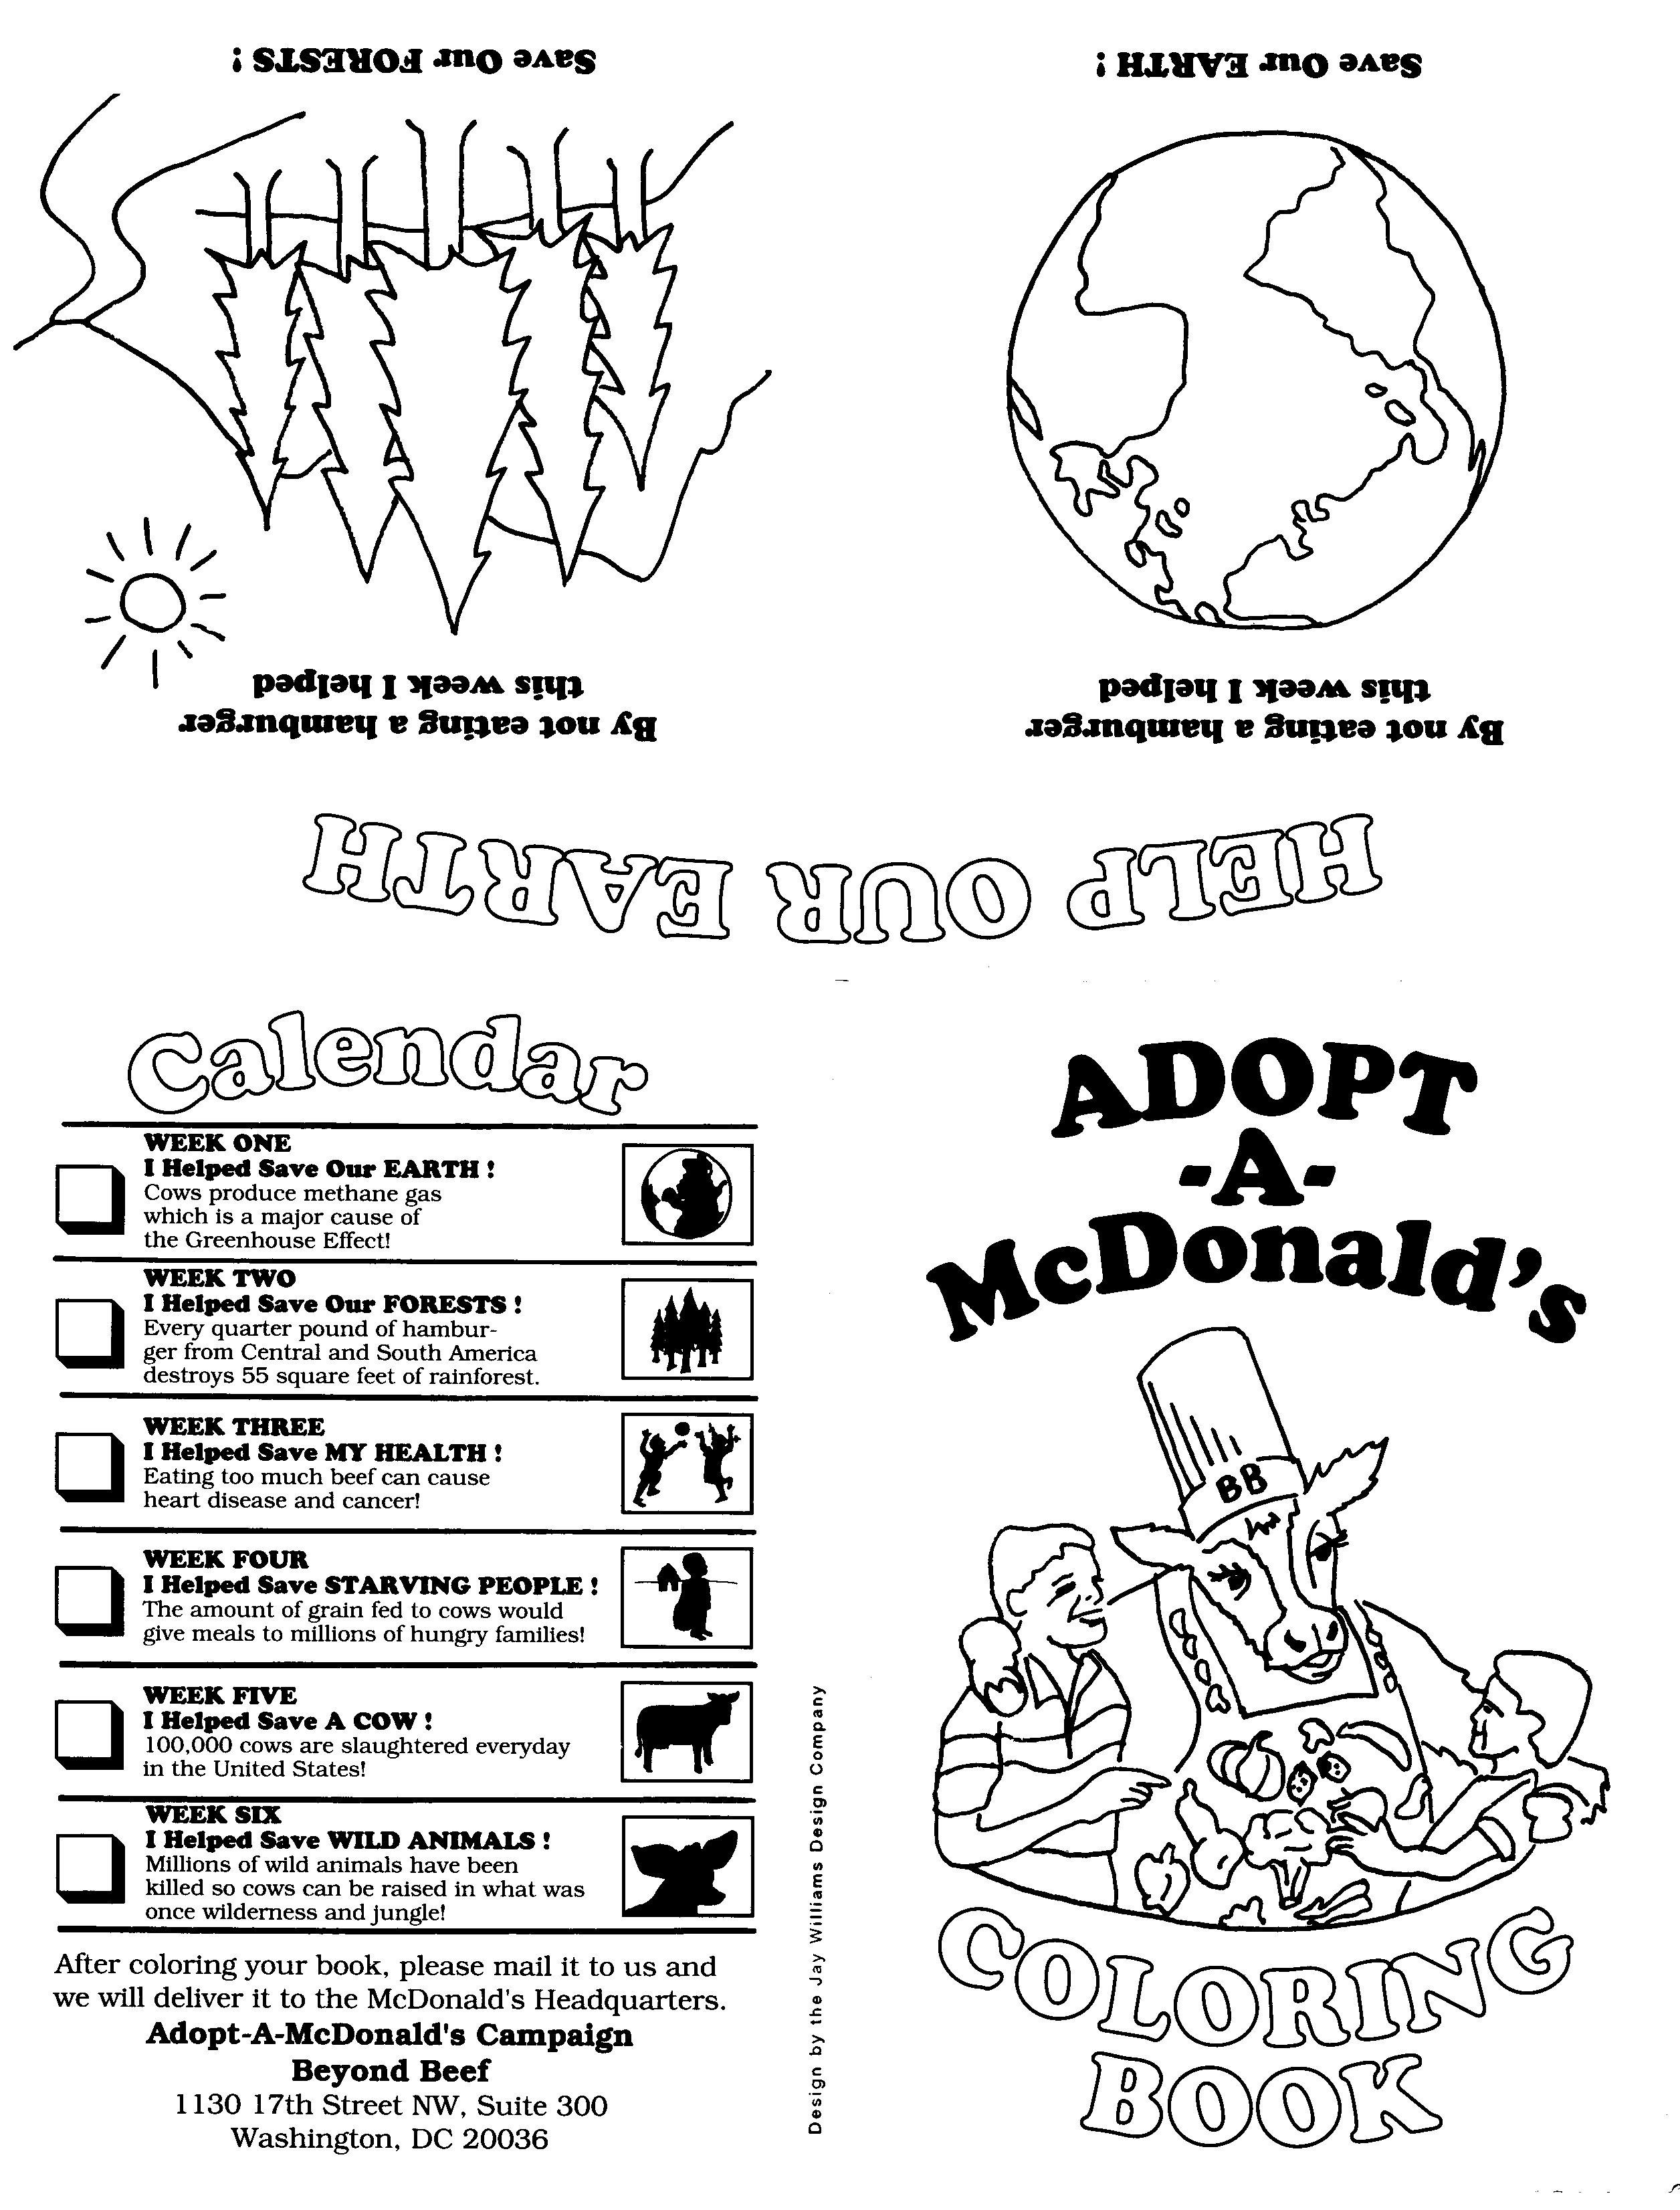 Adopt A McDonald s Coloring Book Page 1